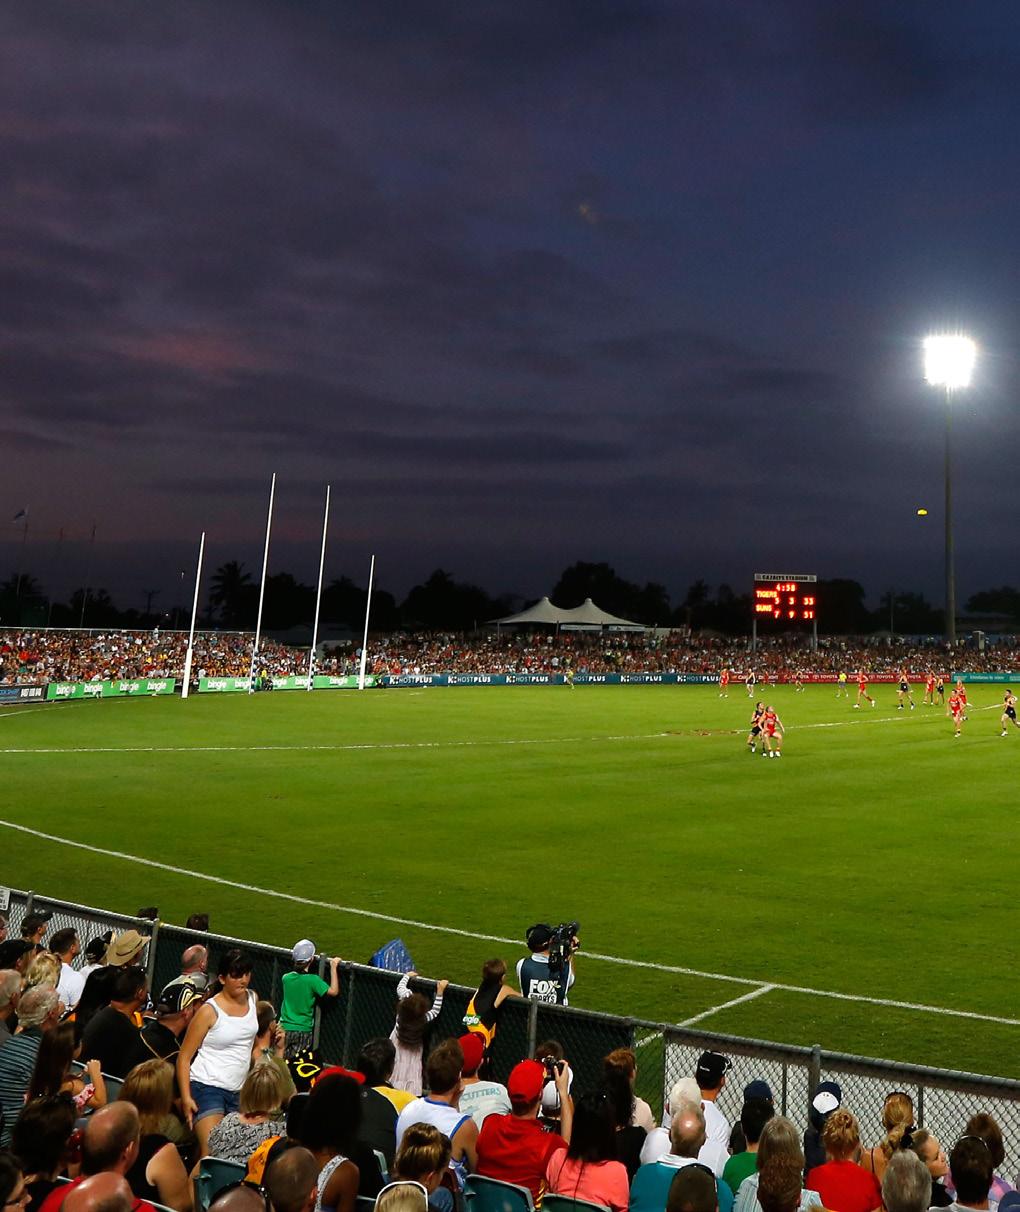 ENTERTAIN YOUR GUESTS 2013 sees Cazalys Stadium hosts its third Toyota AFL Premiership Season match, with Richmond taking